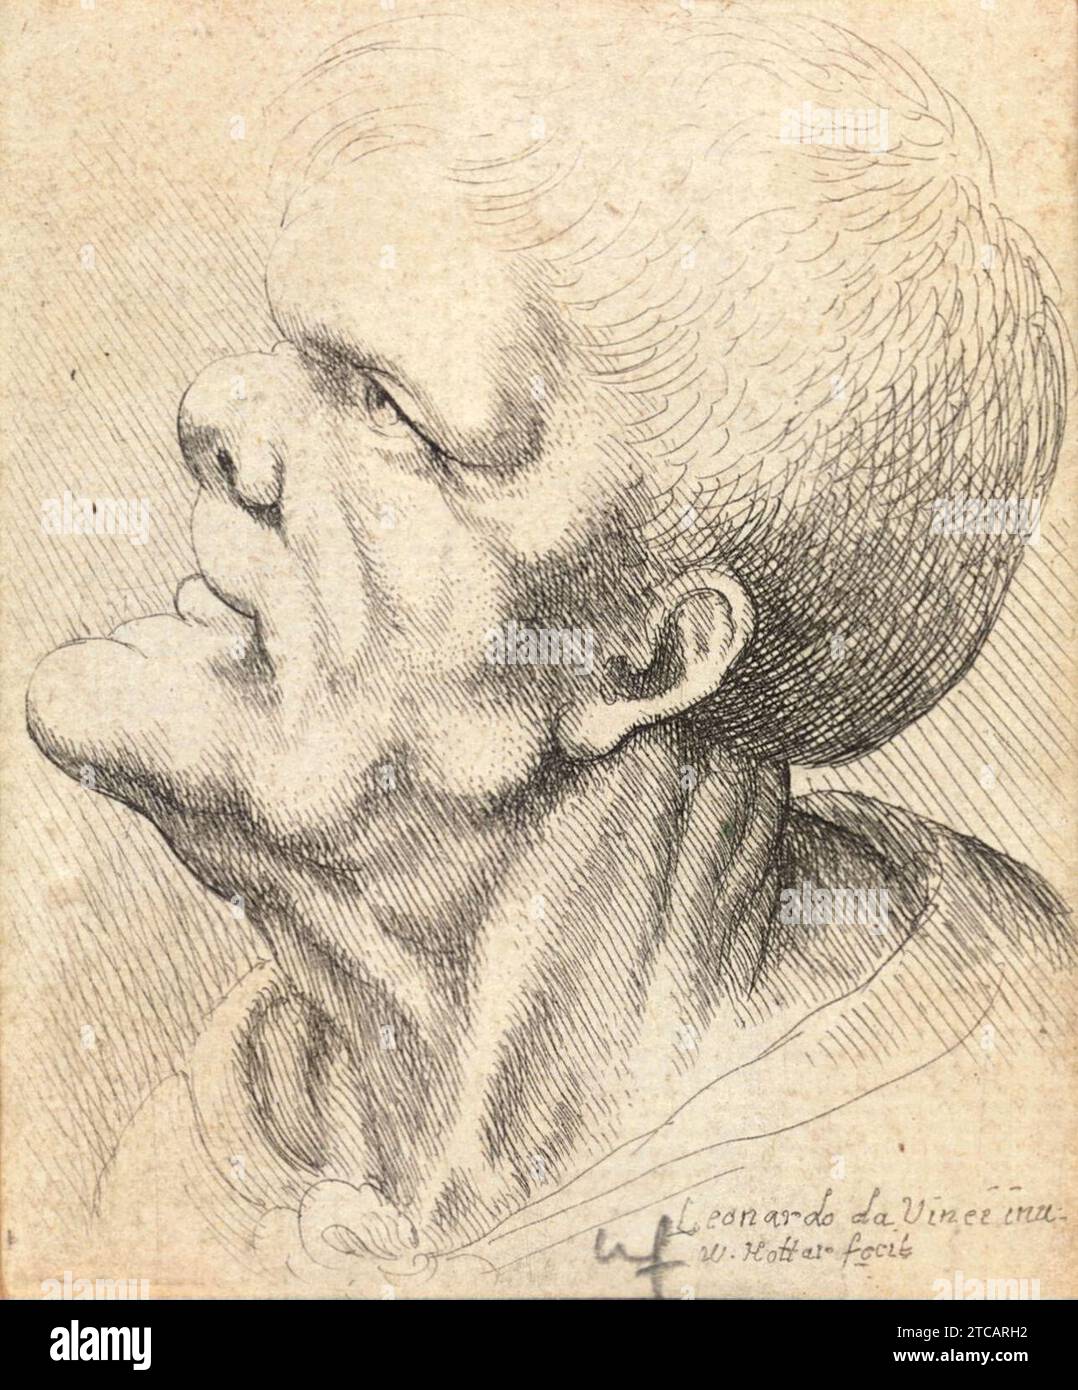 Wenceslas Hollar - Man with snub nose and flattened chin. Stock Photo